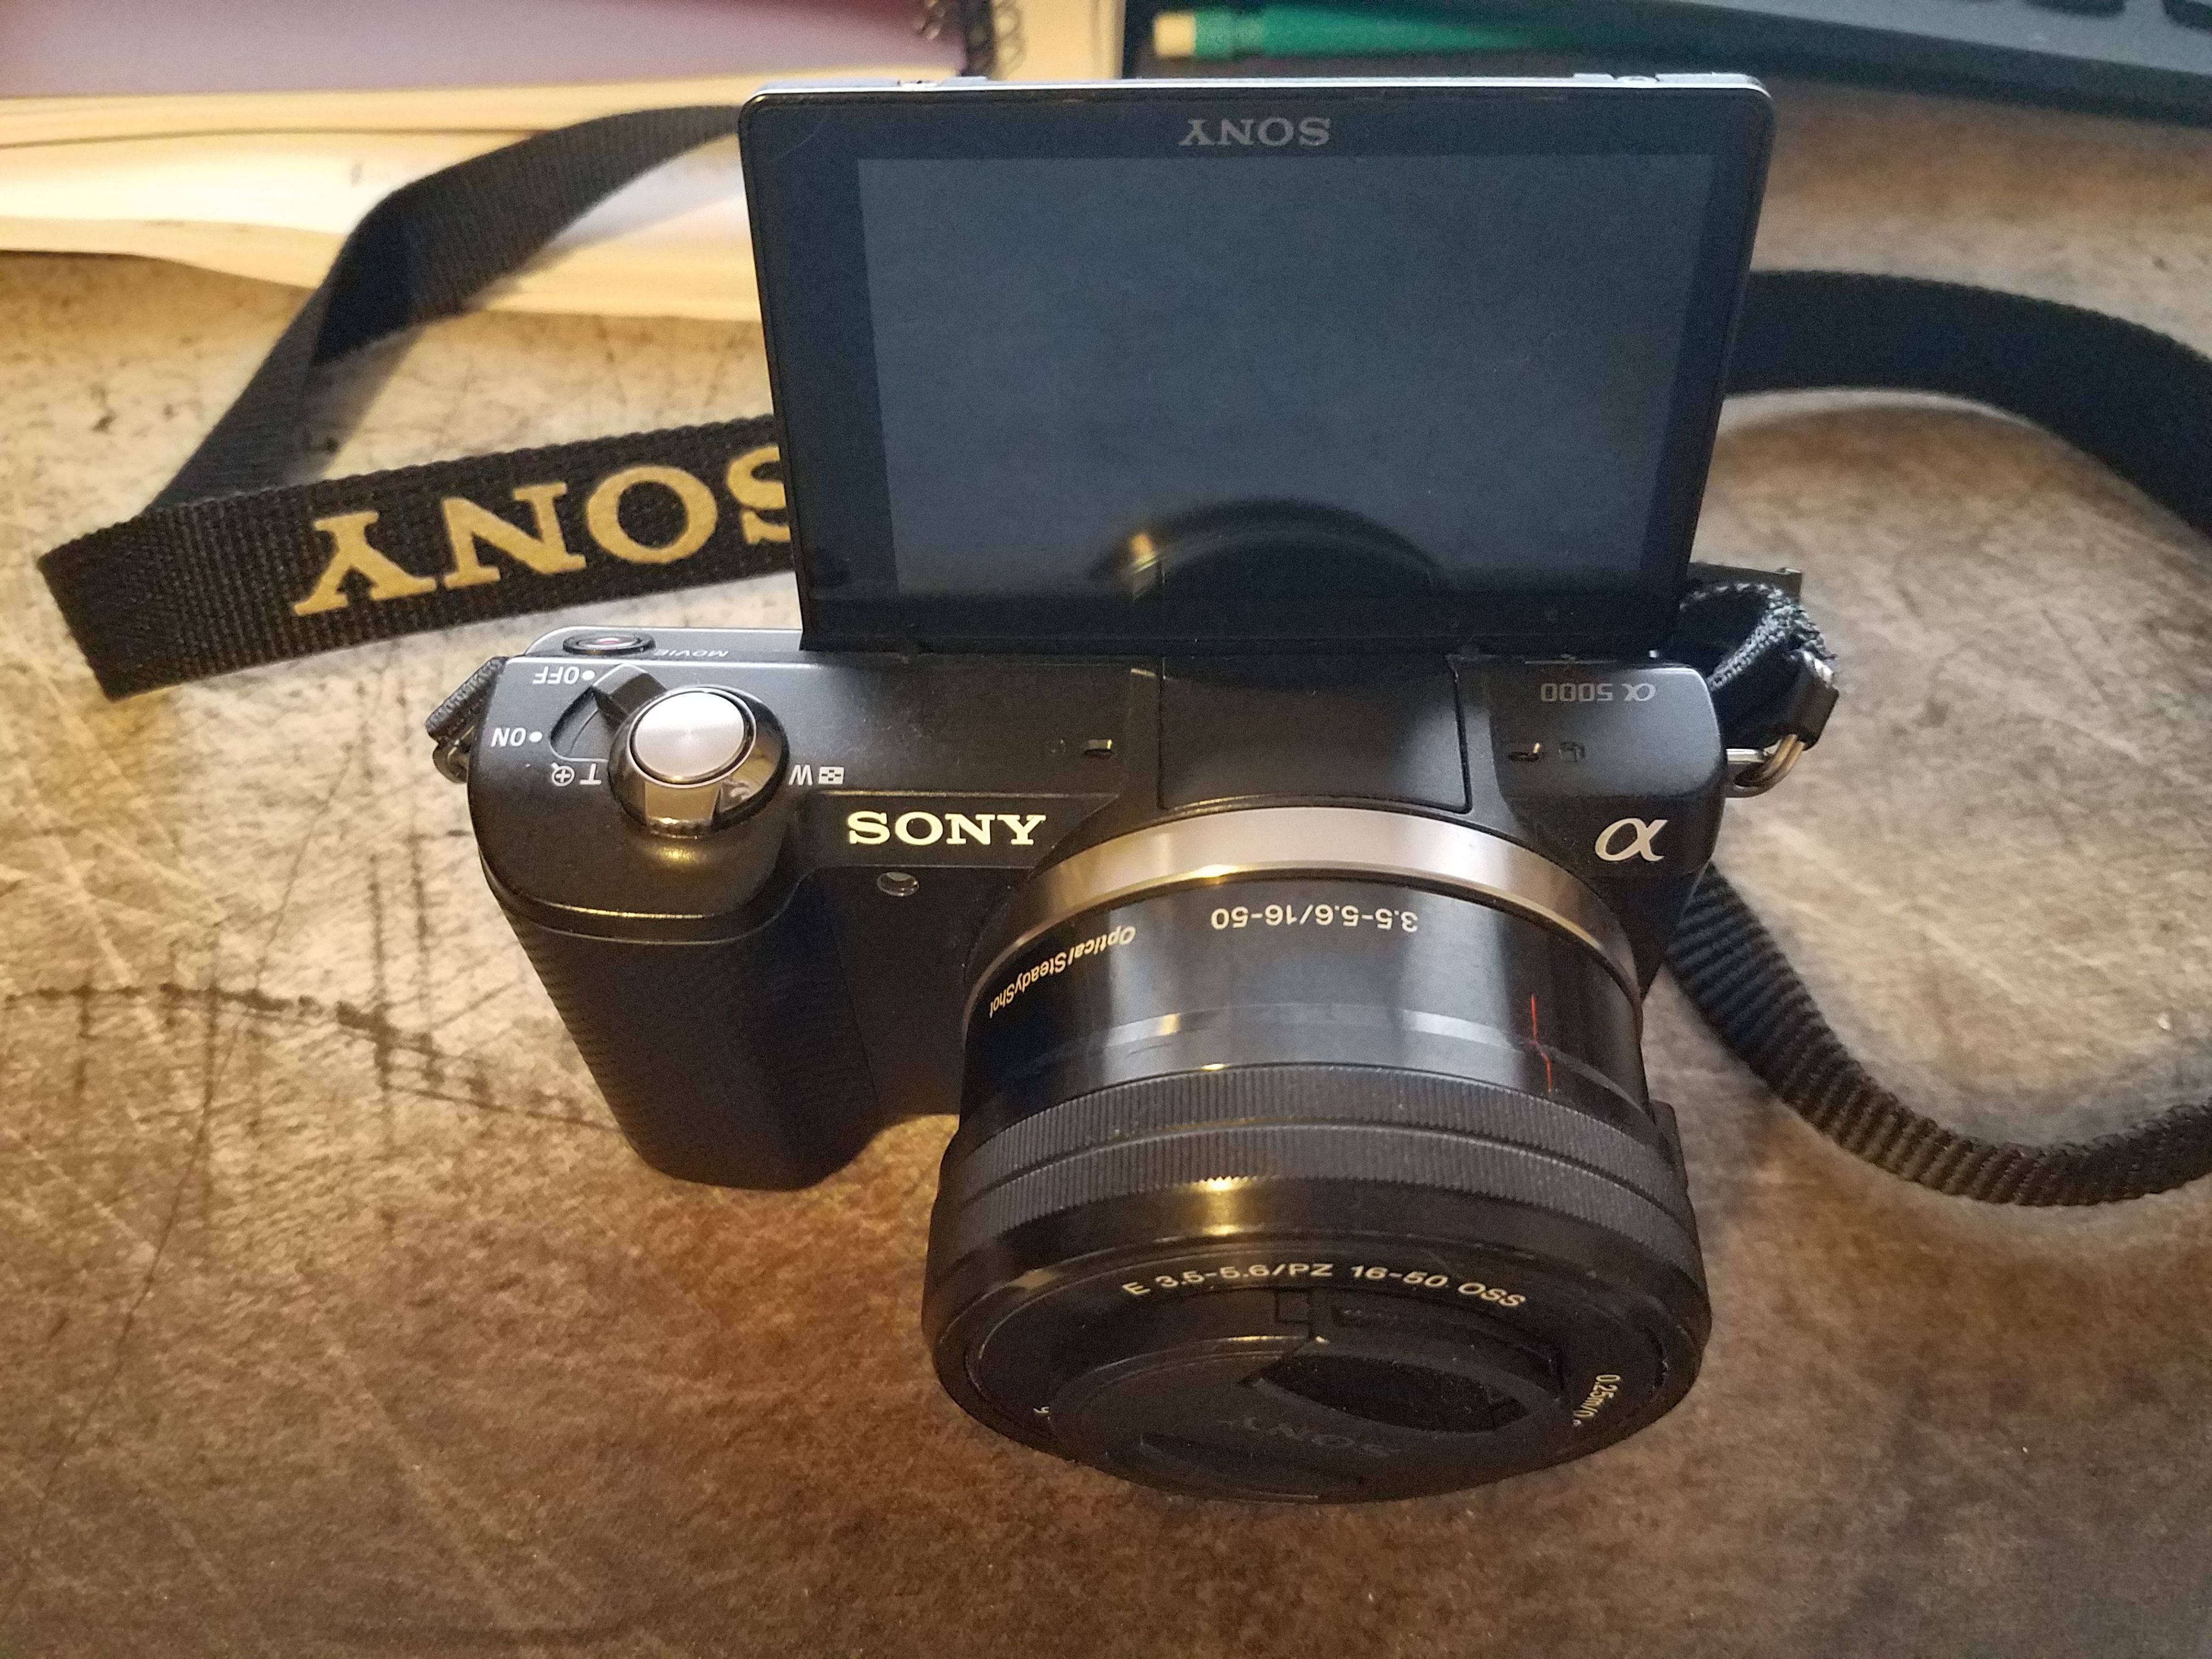 Sony alpha a5000 mirrorless camera with 16-50mm lens